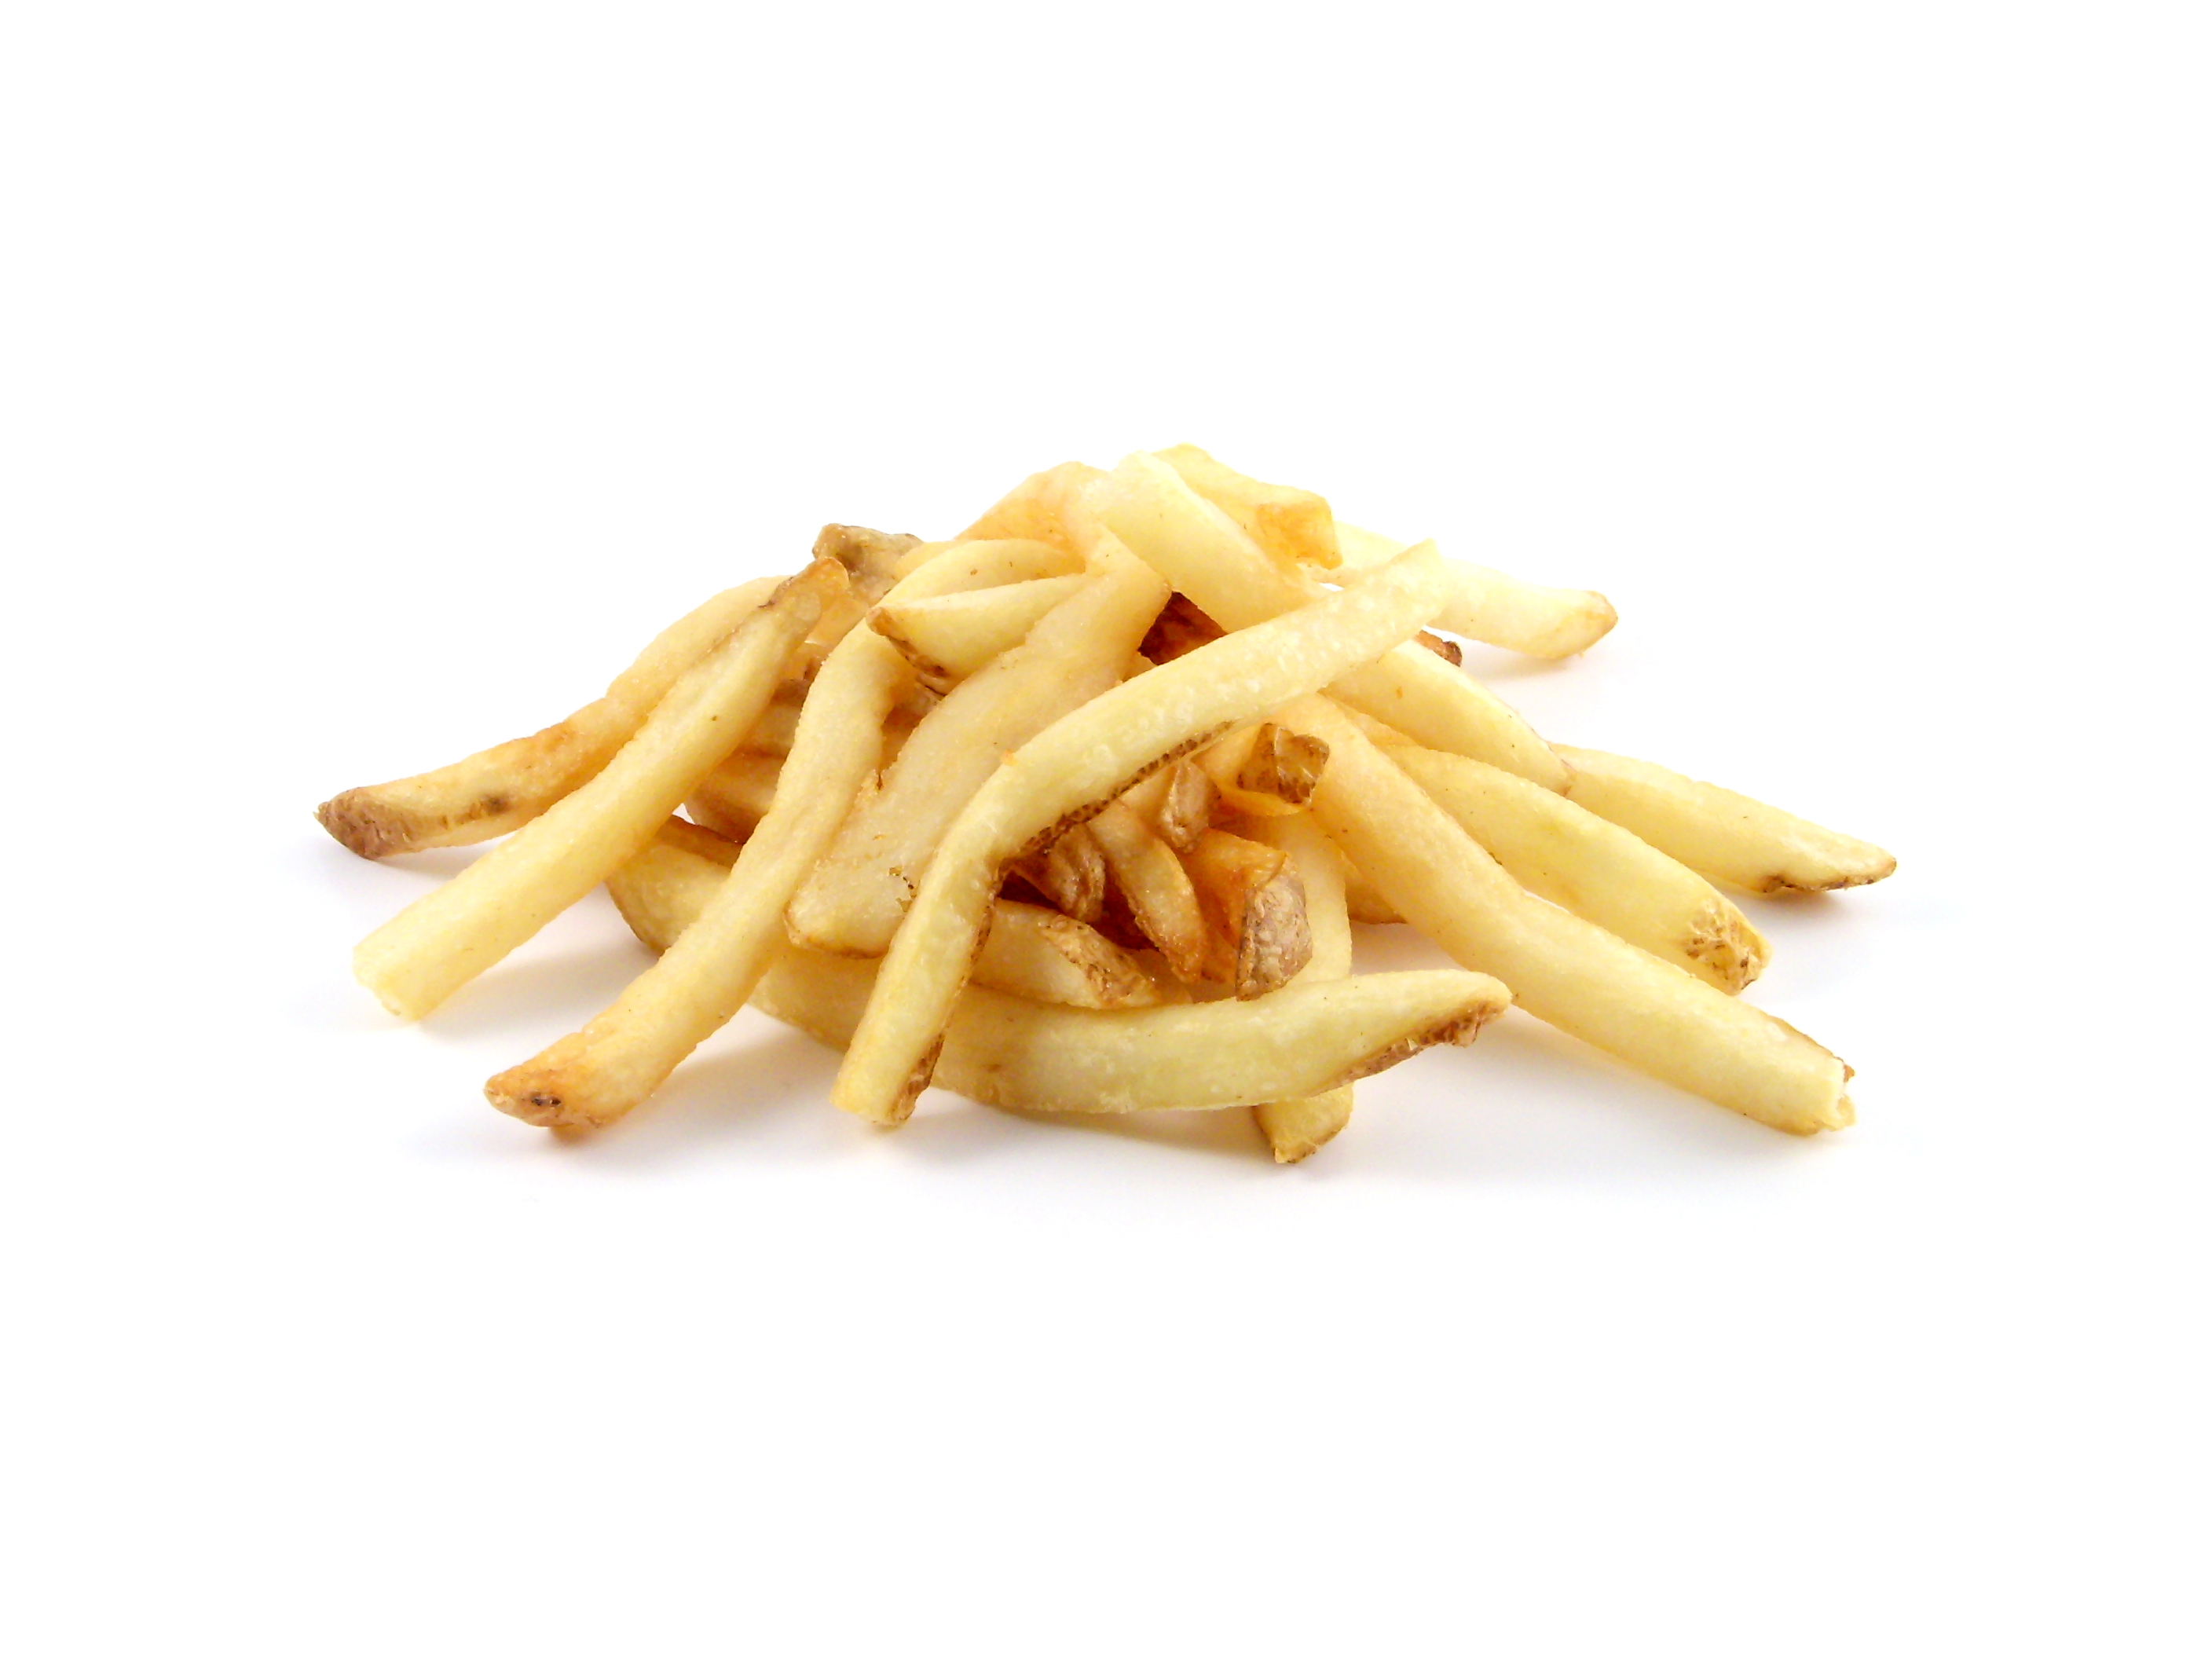 French Fries - French Fries Photo (35339450) - Fanpop